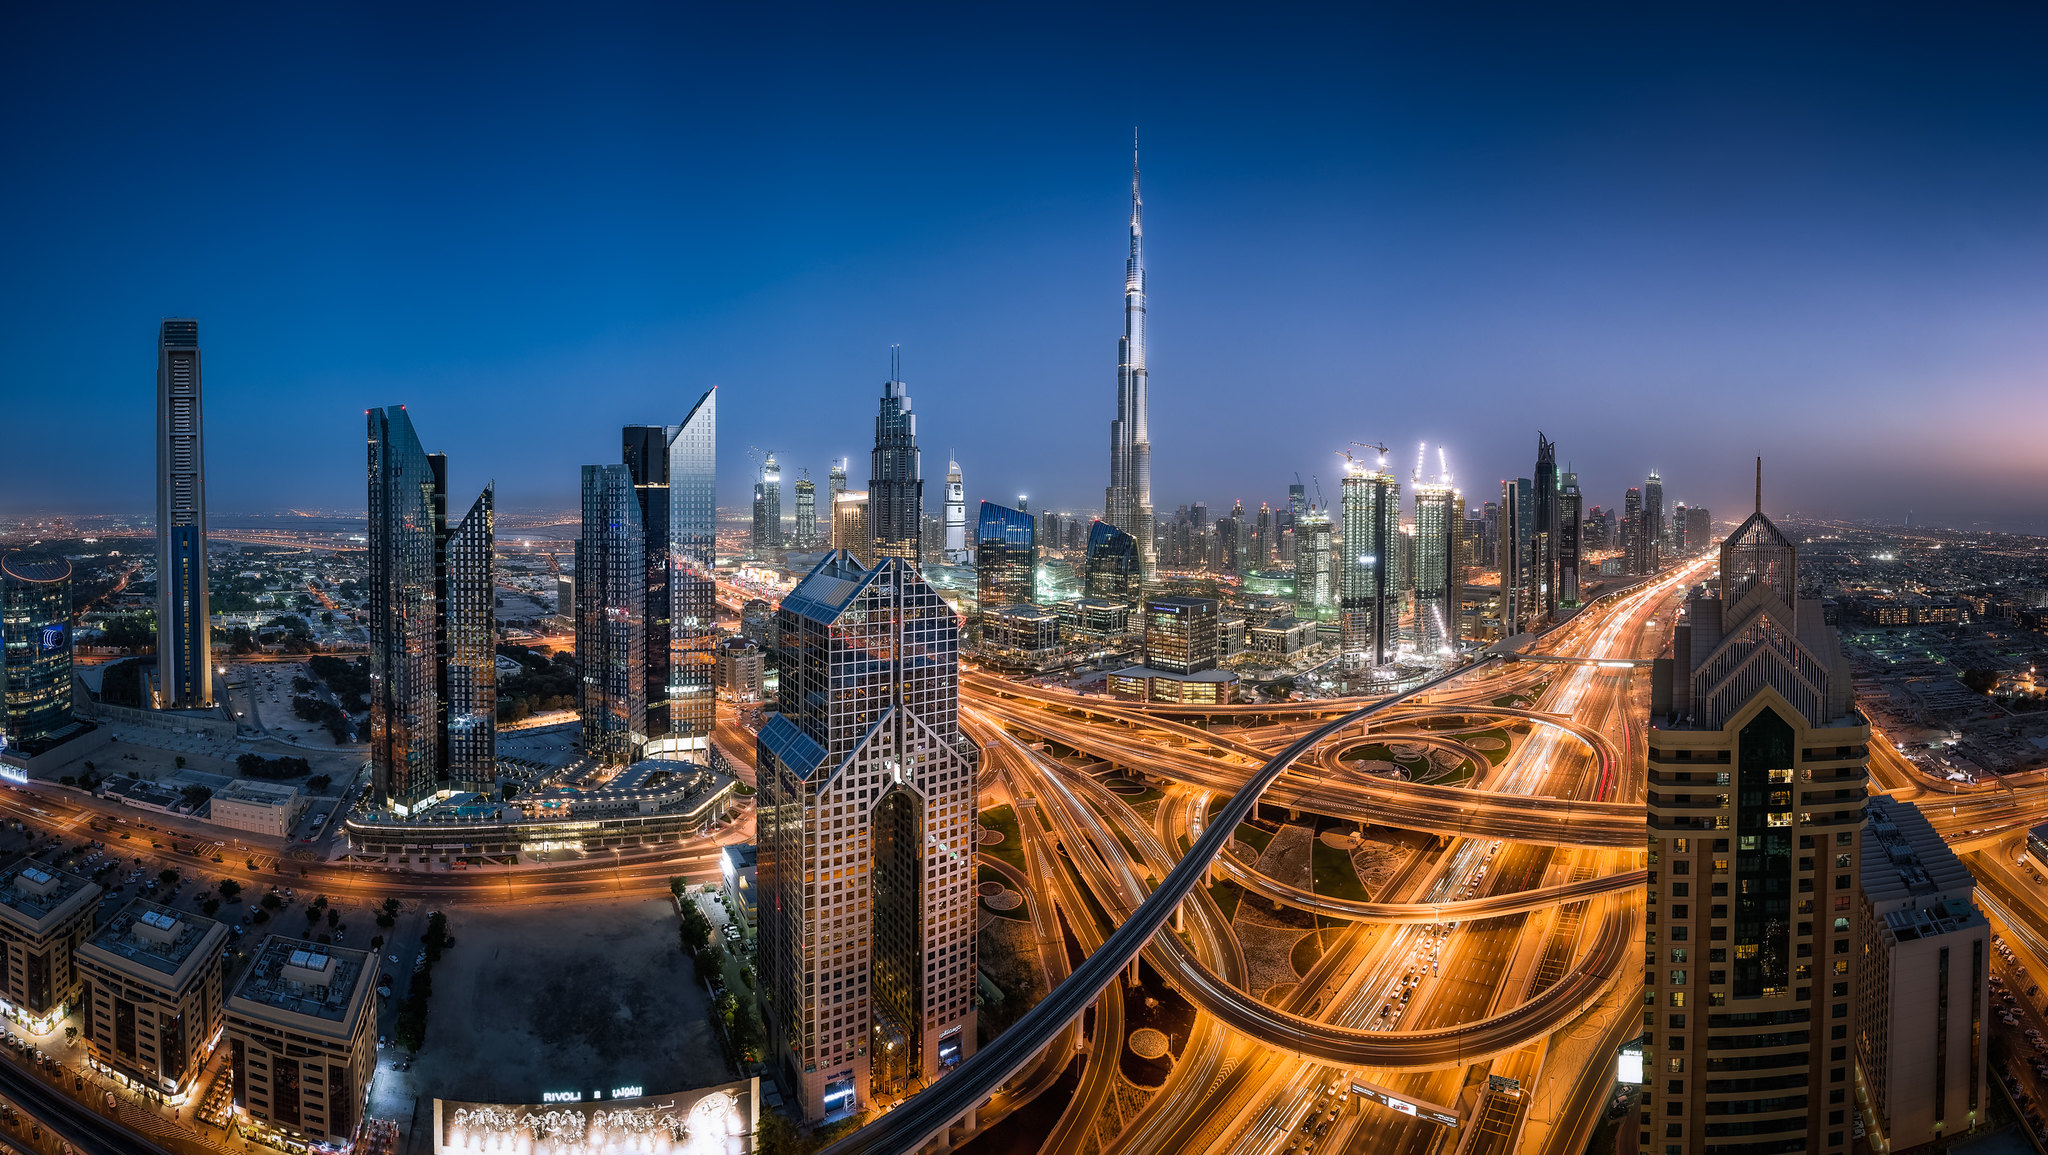 Wallpapers night cities architecture United Arab Emirates on the desktop